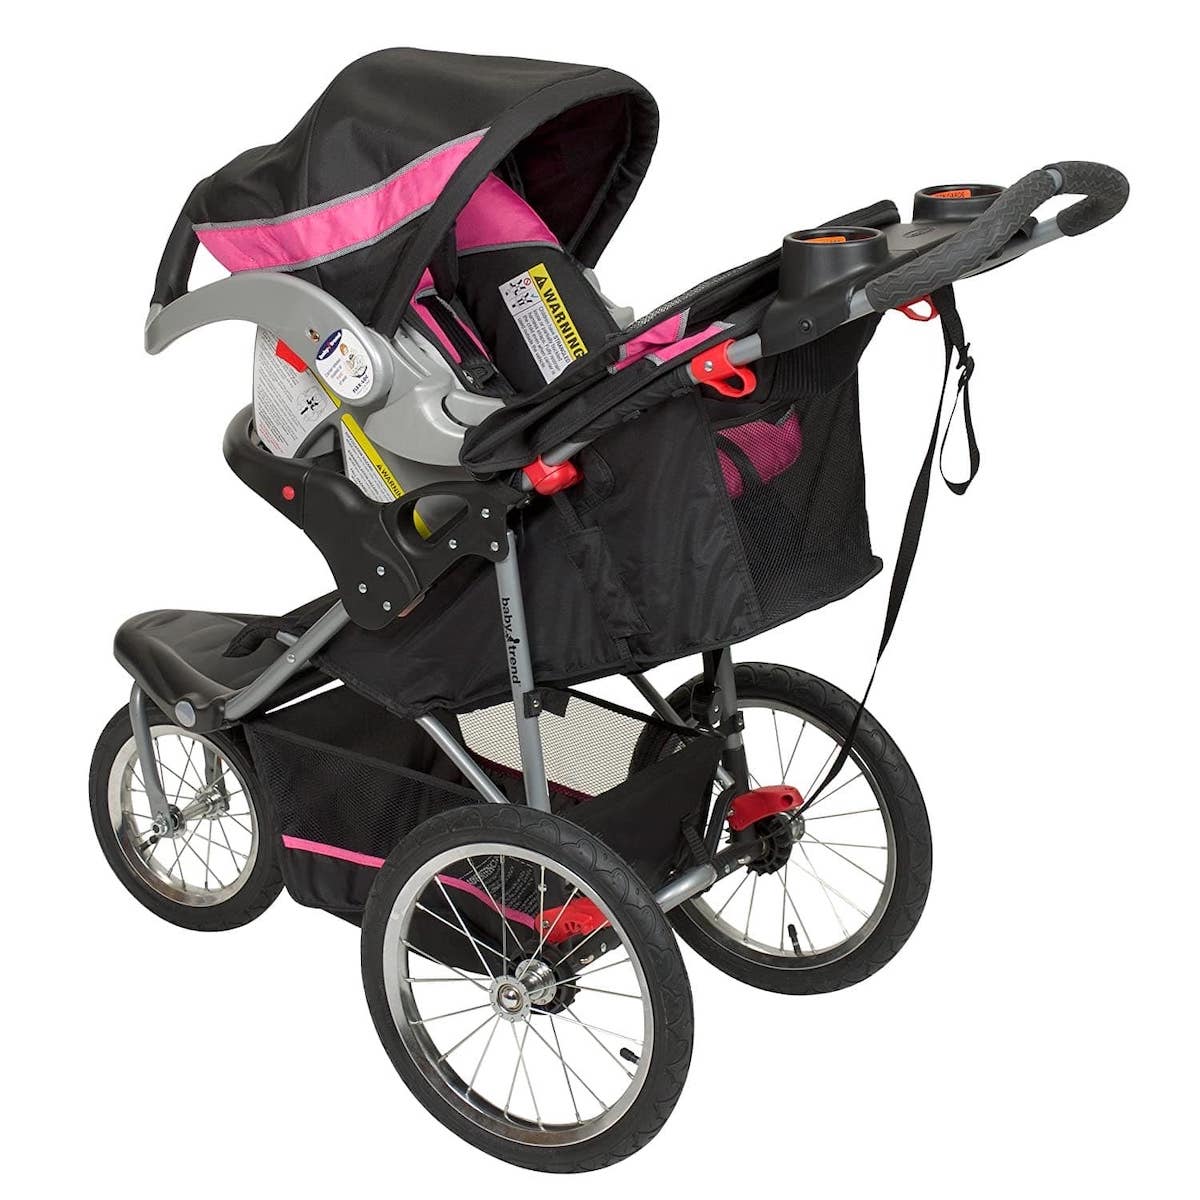 Baby Trend Expedition Jogger 3 wheel Stroller